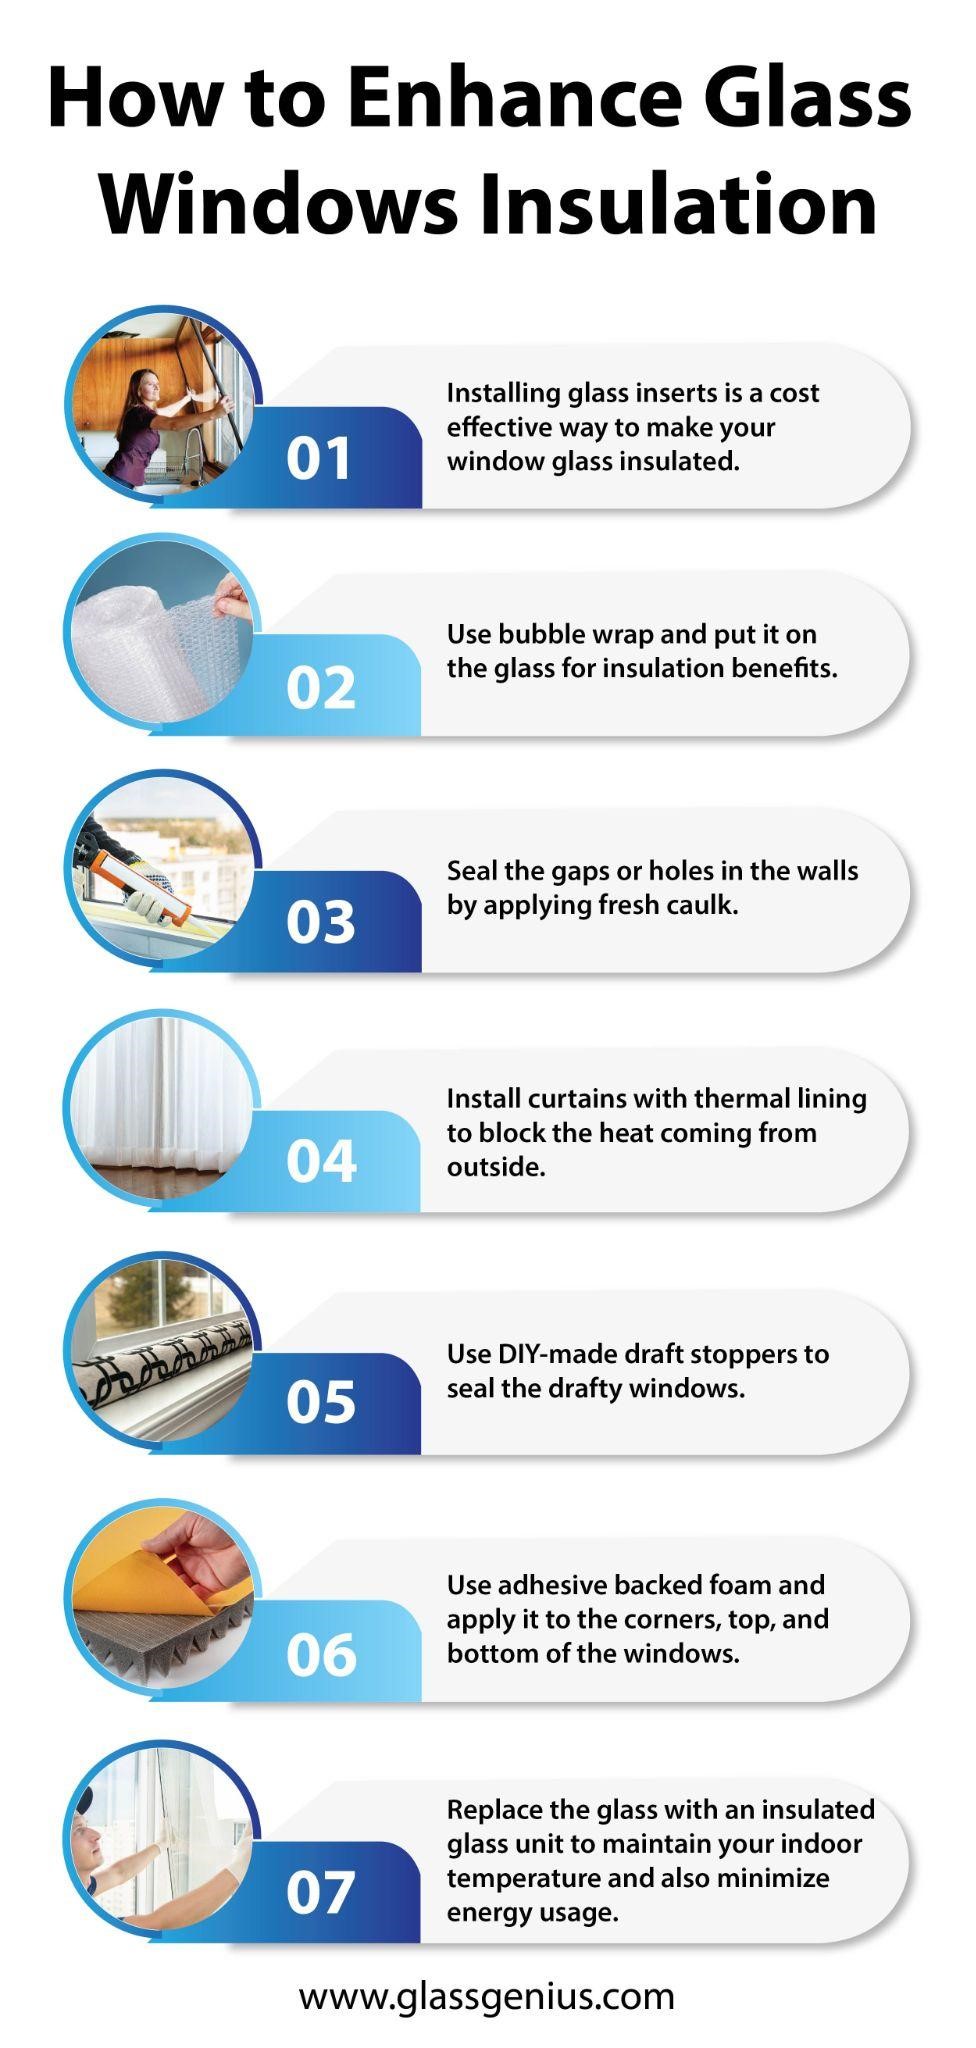 Ways to Insulate Your Apartments Windows